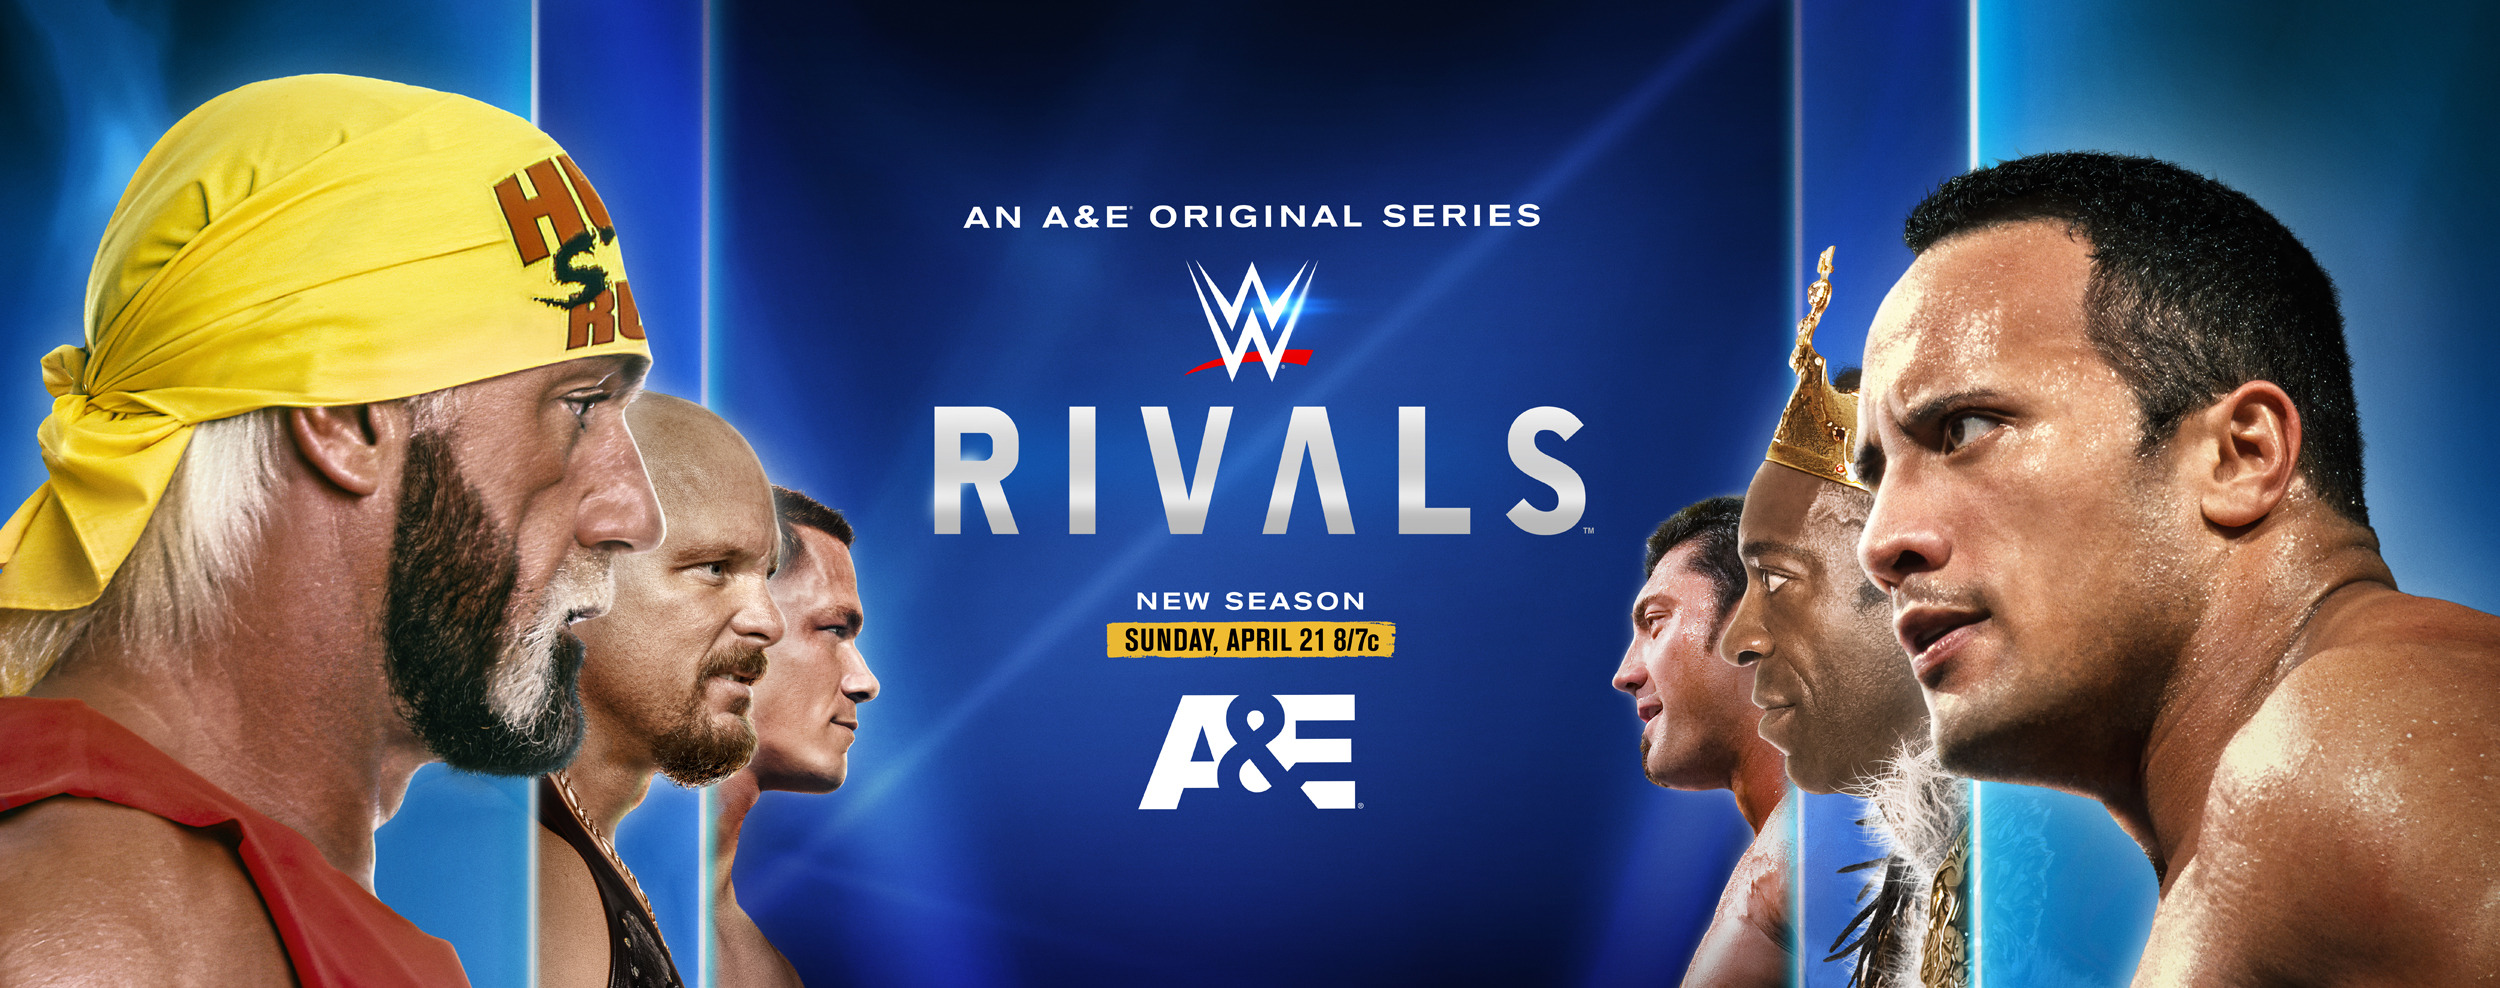 Mega Sized TV Poster Image for WWE Rivals (#6 of 6)